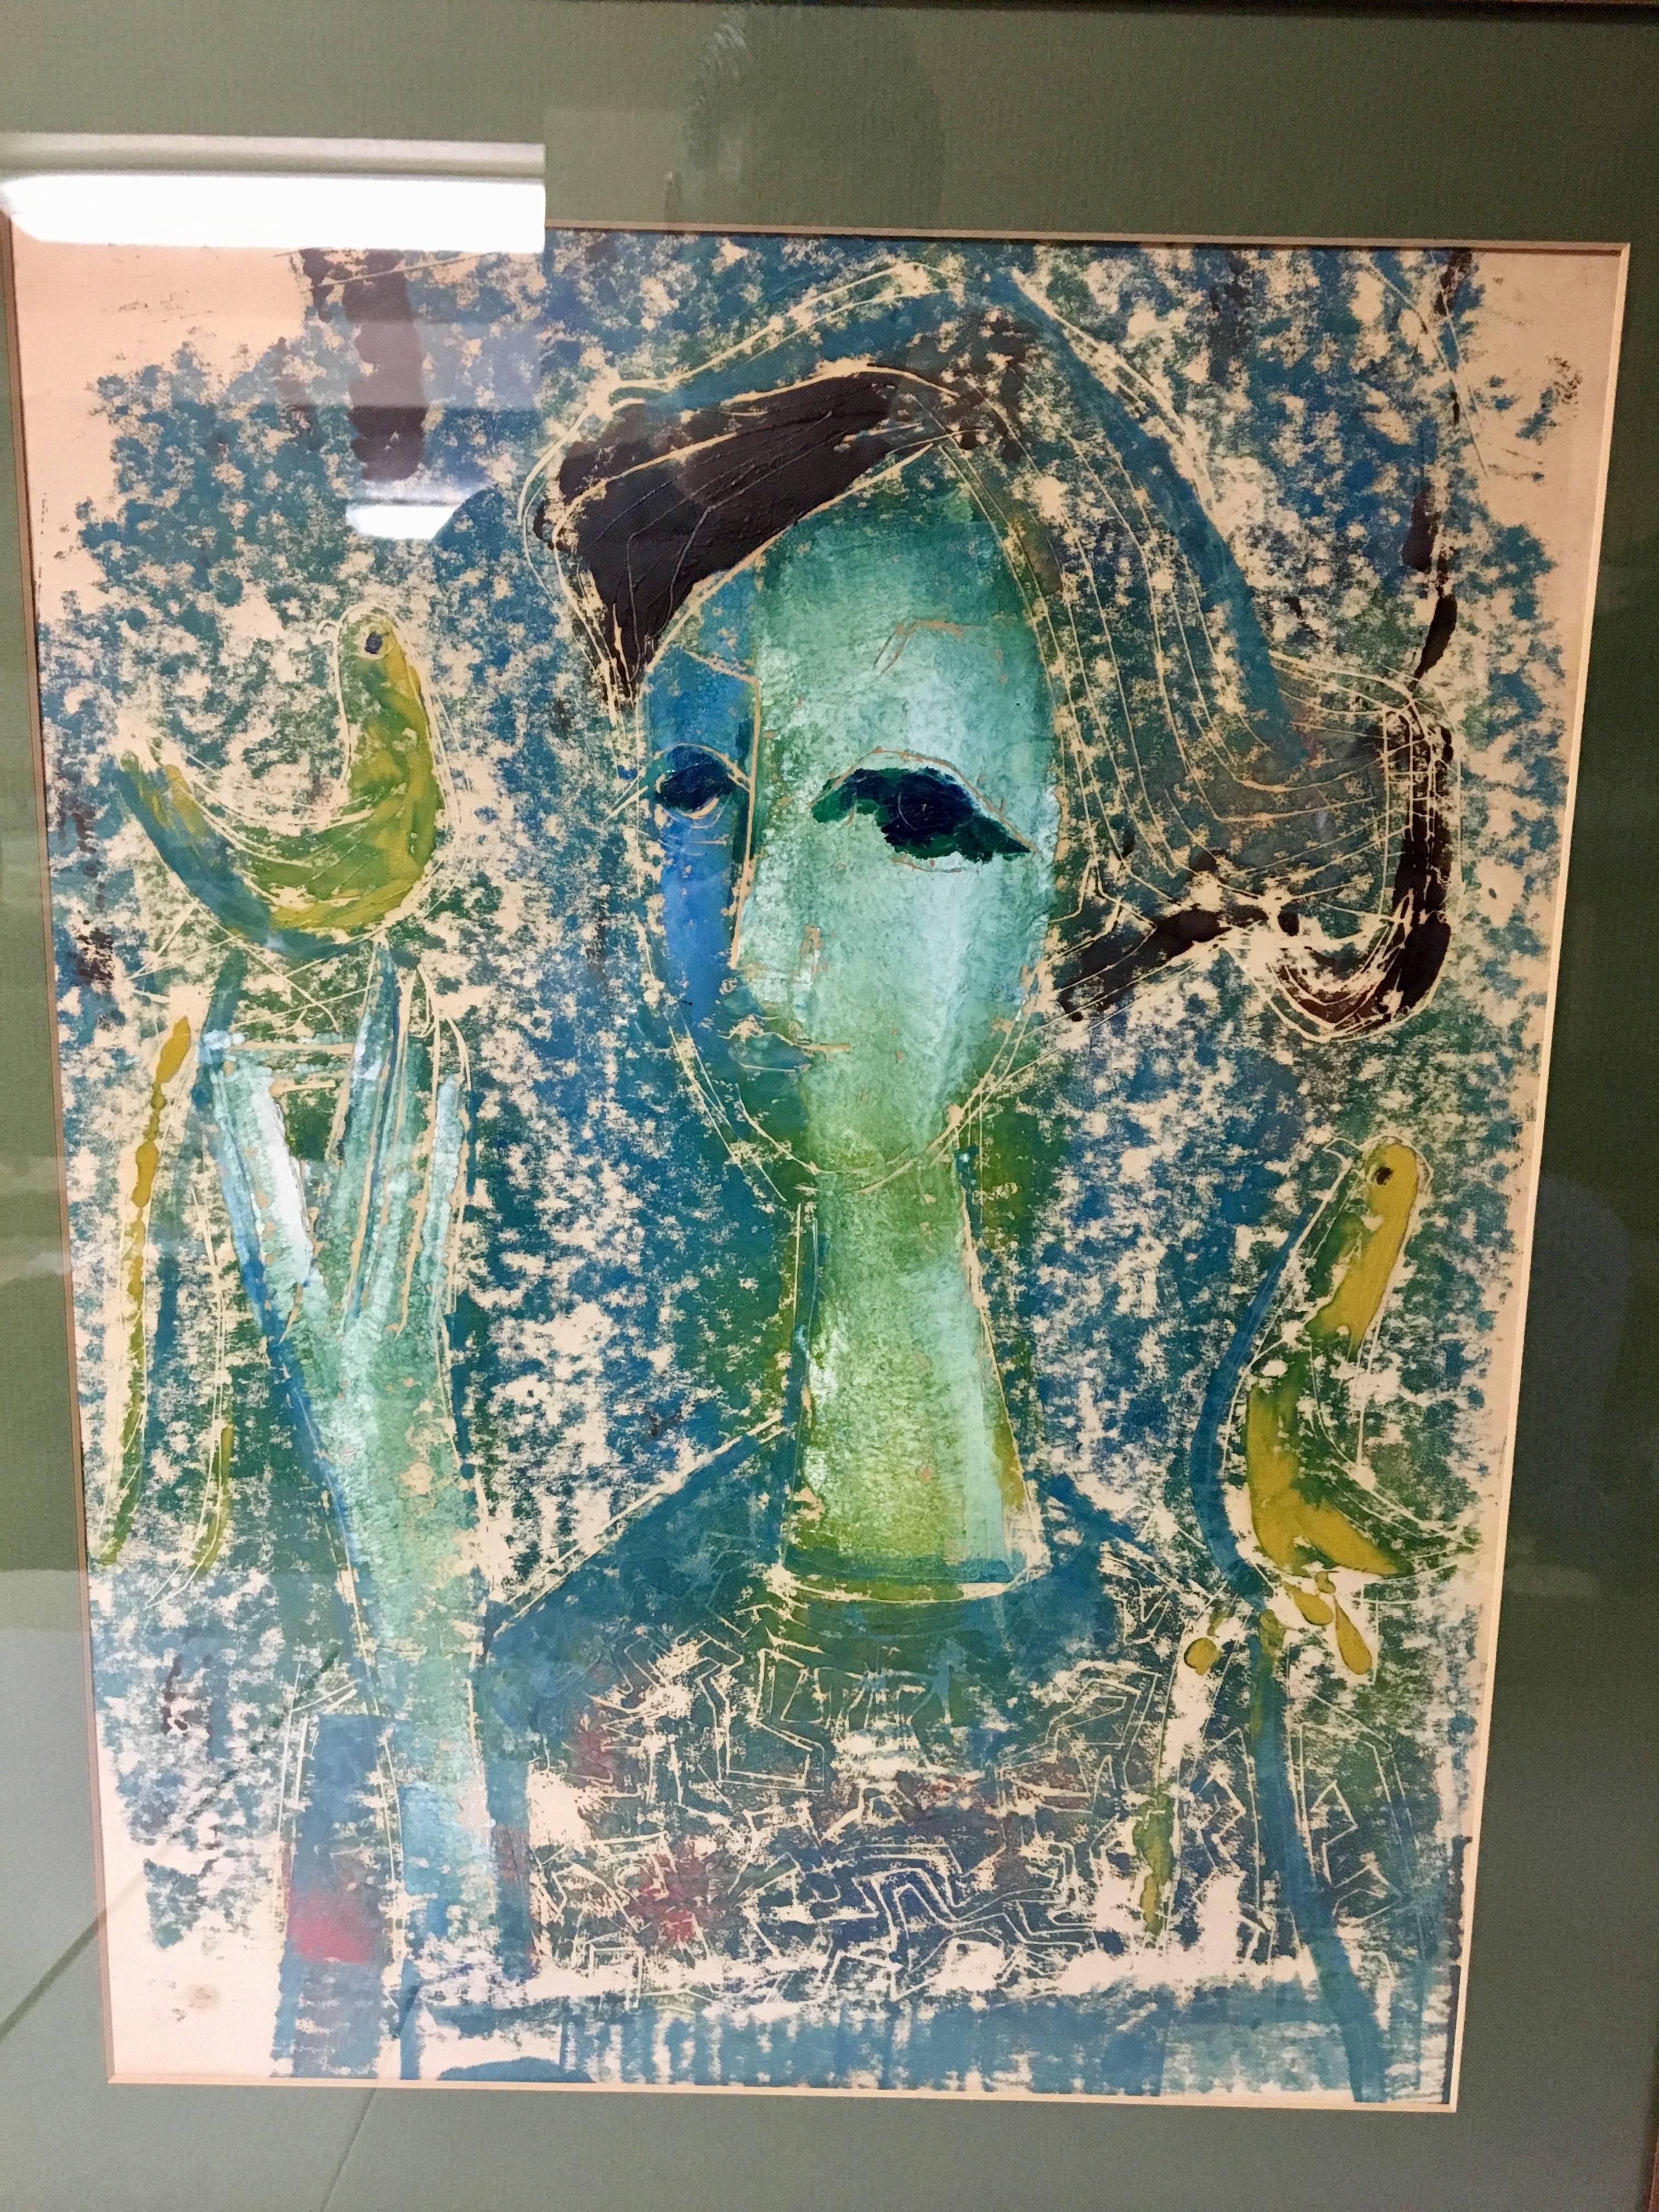 A very cool Mid-Century block print portrait of a young woman and two doves by listed artist Alex Boz (Bozickovic). Great color and style; would make a great addition to any MCM space!